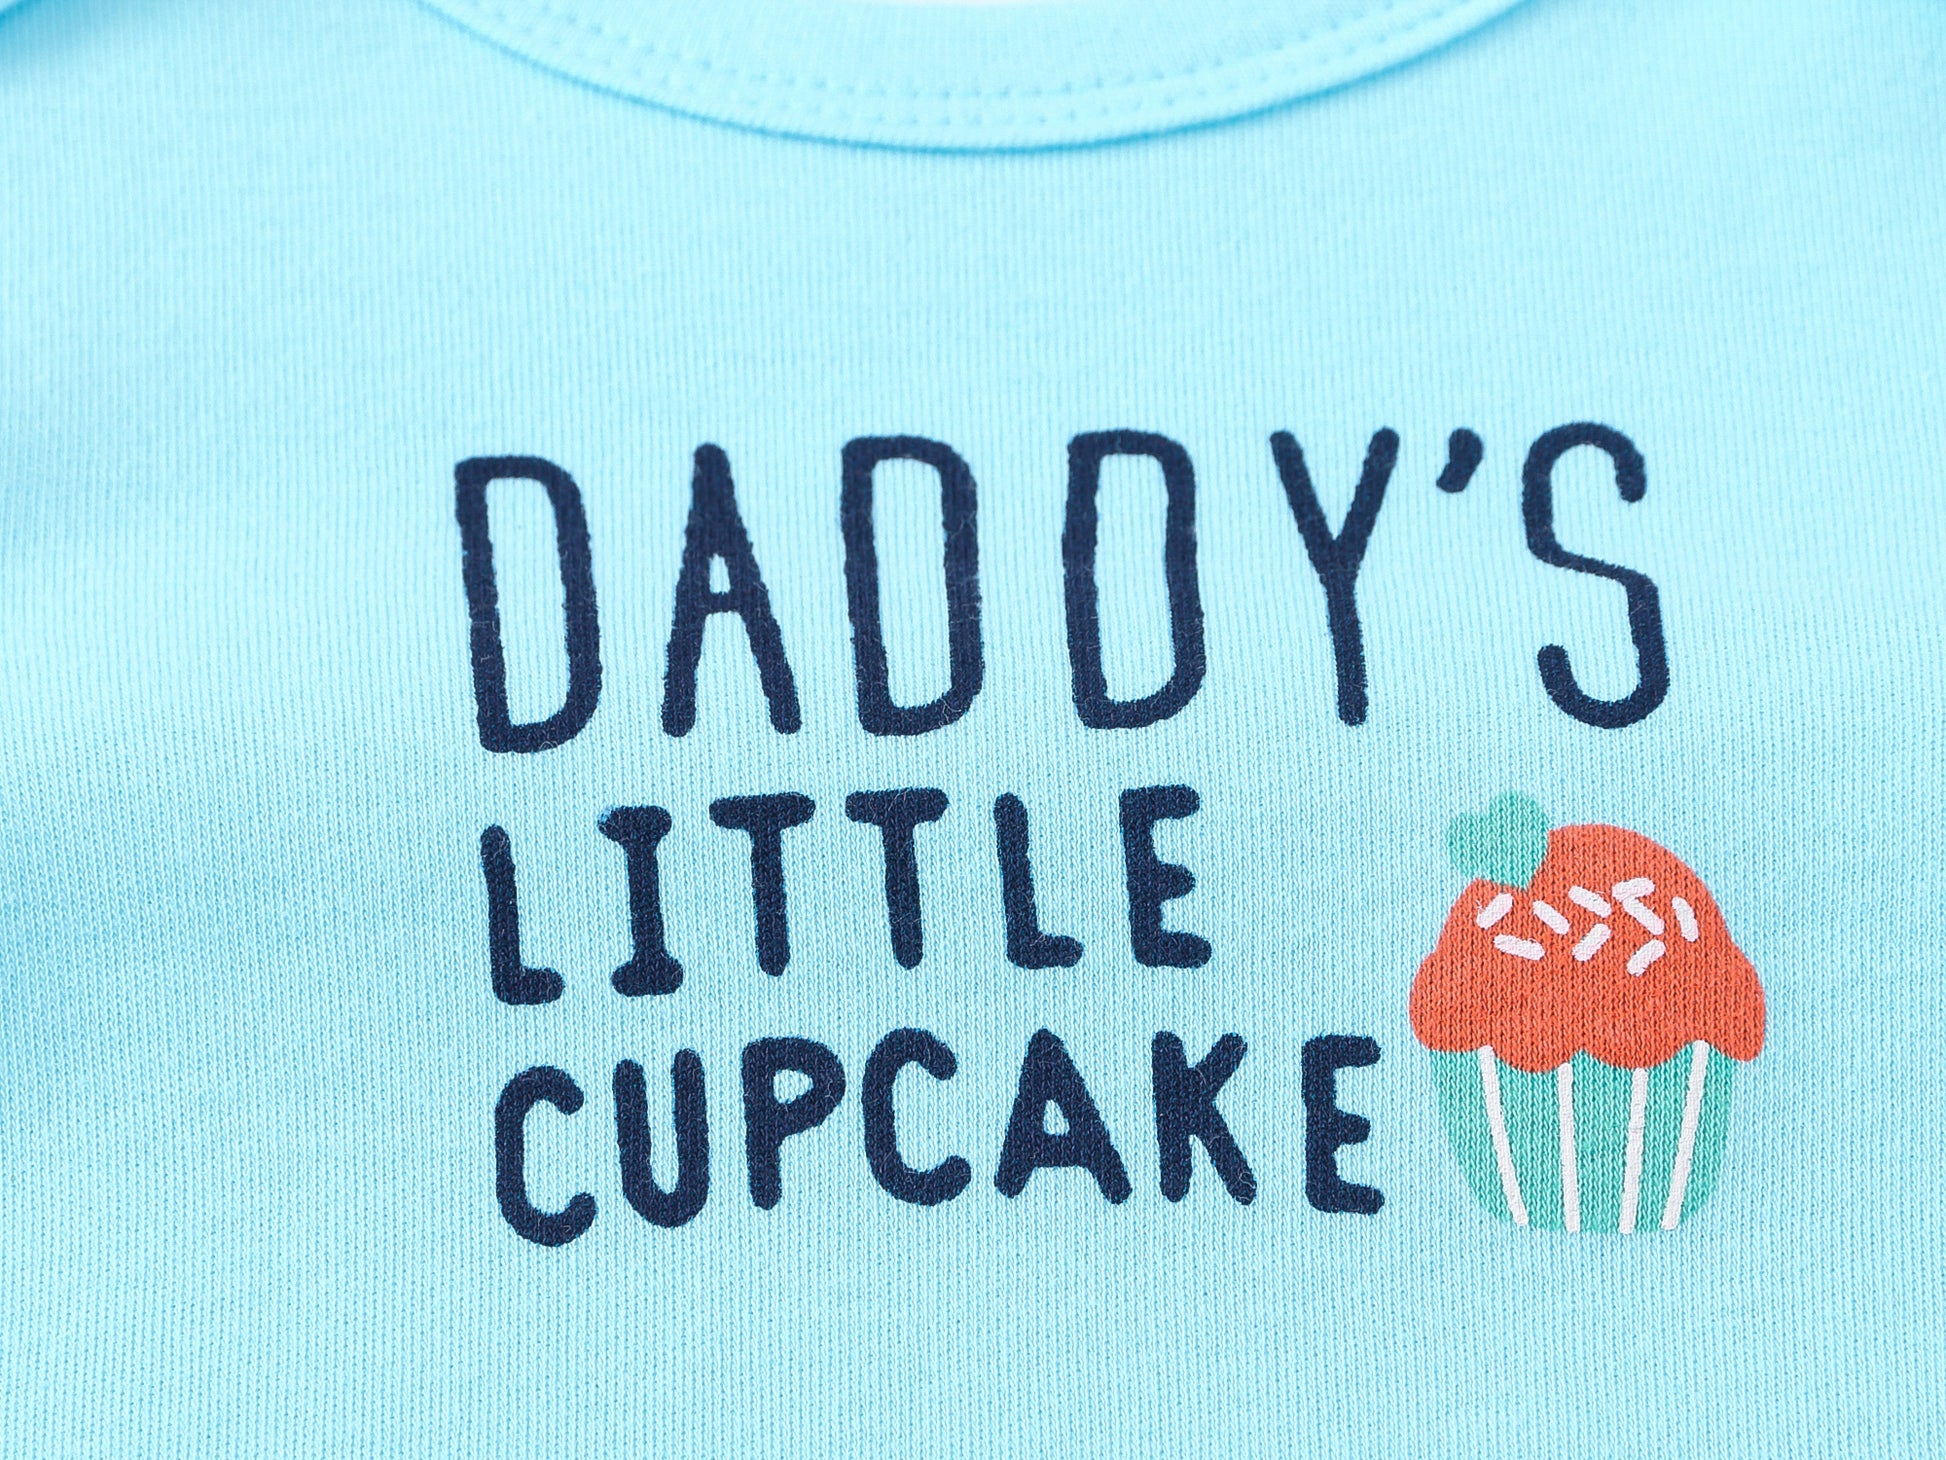 Baby Body daddy´s little cupcake at titchytastic